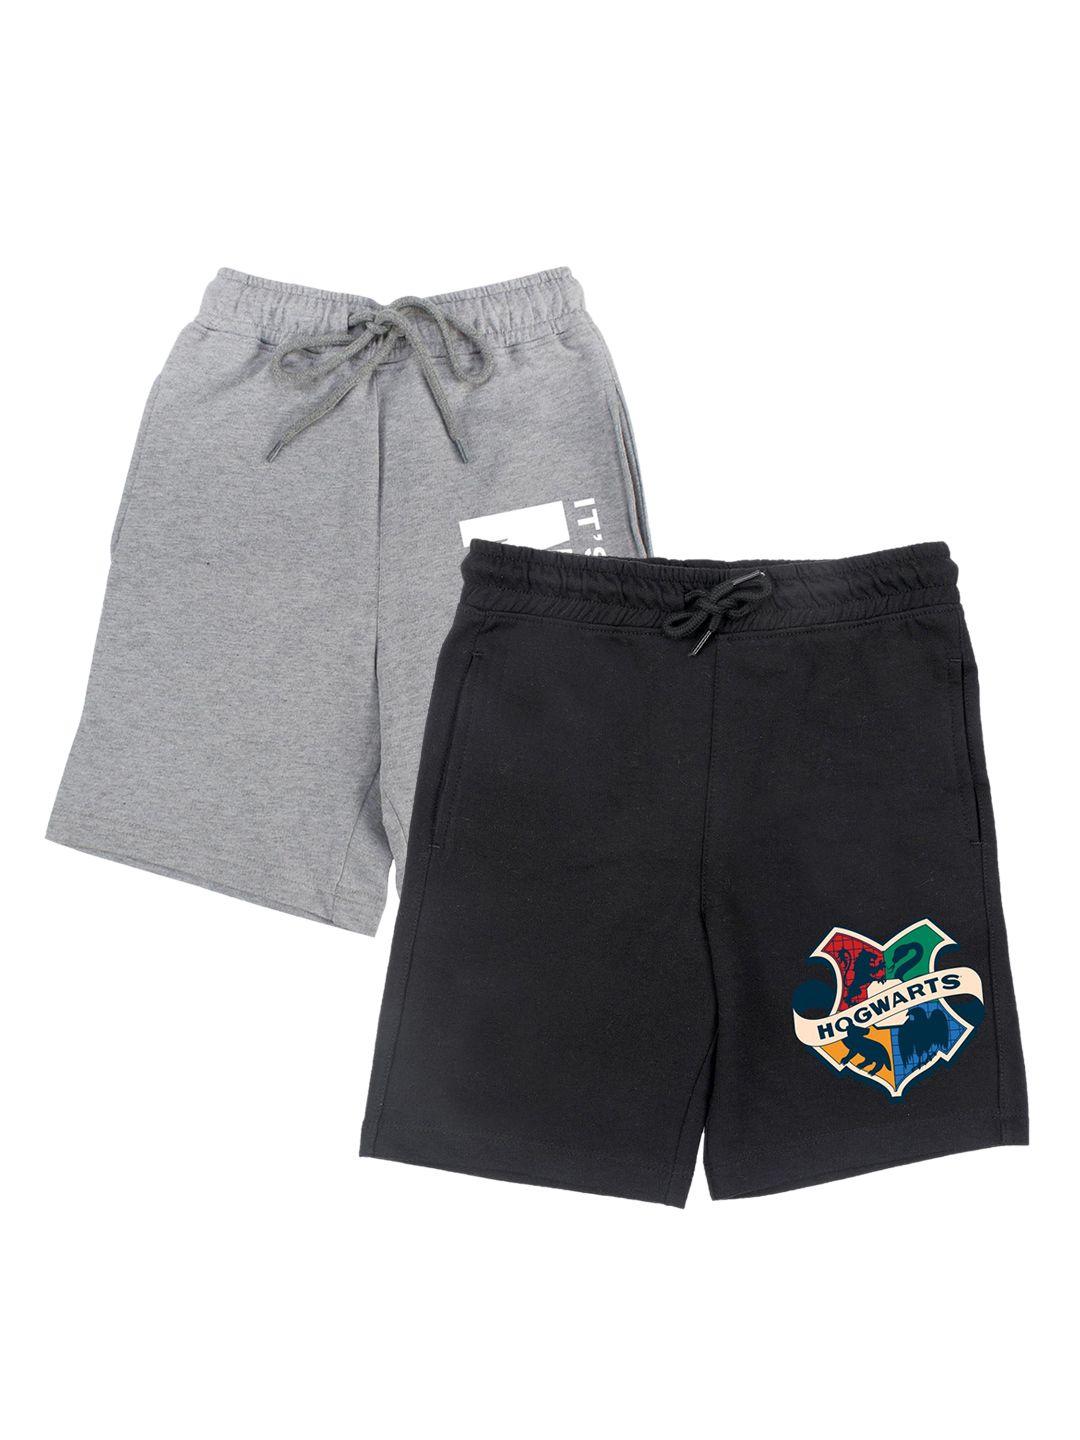 harry potter by wear your mind boys pack of 2 harry potter shorts